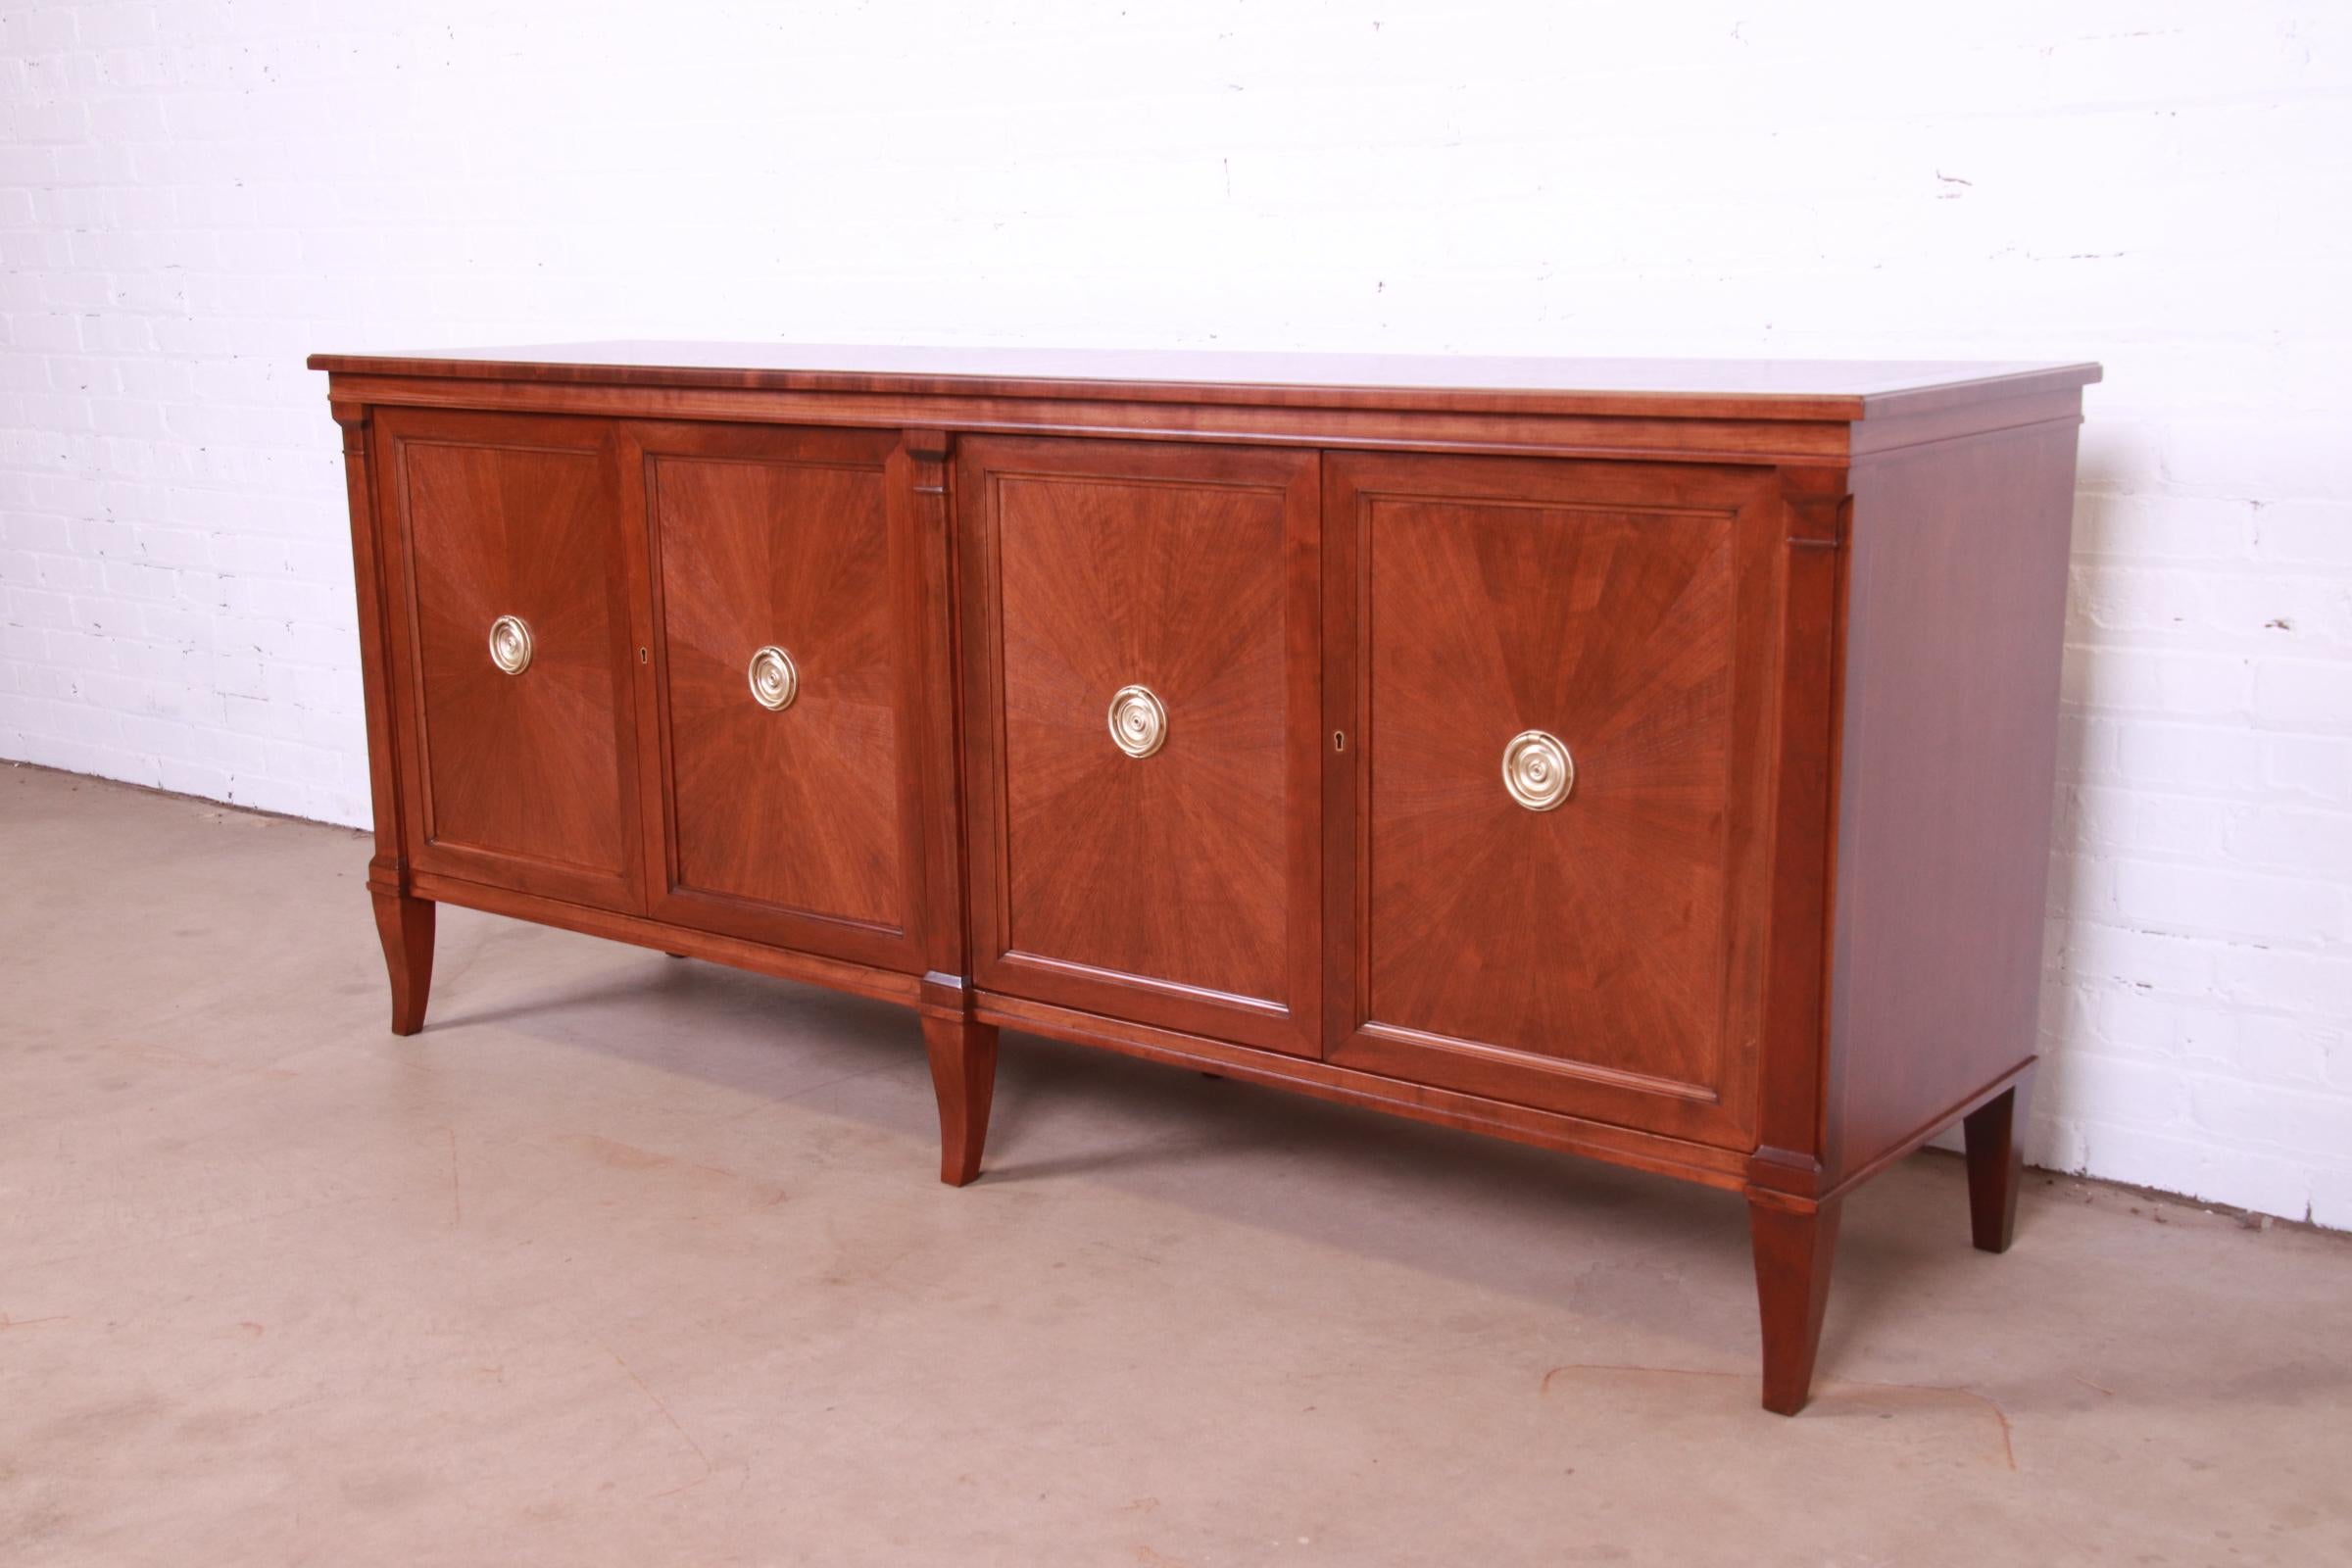 20th Century Baker Furniture French Regency Walnut Sideboard or Credenza, Newly Refinished